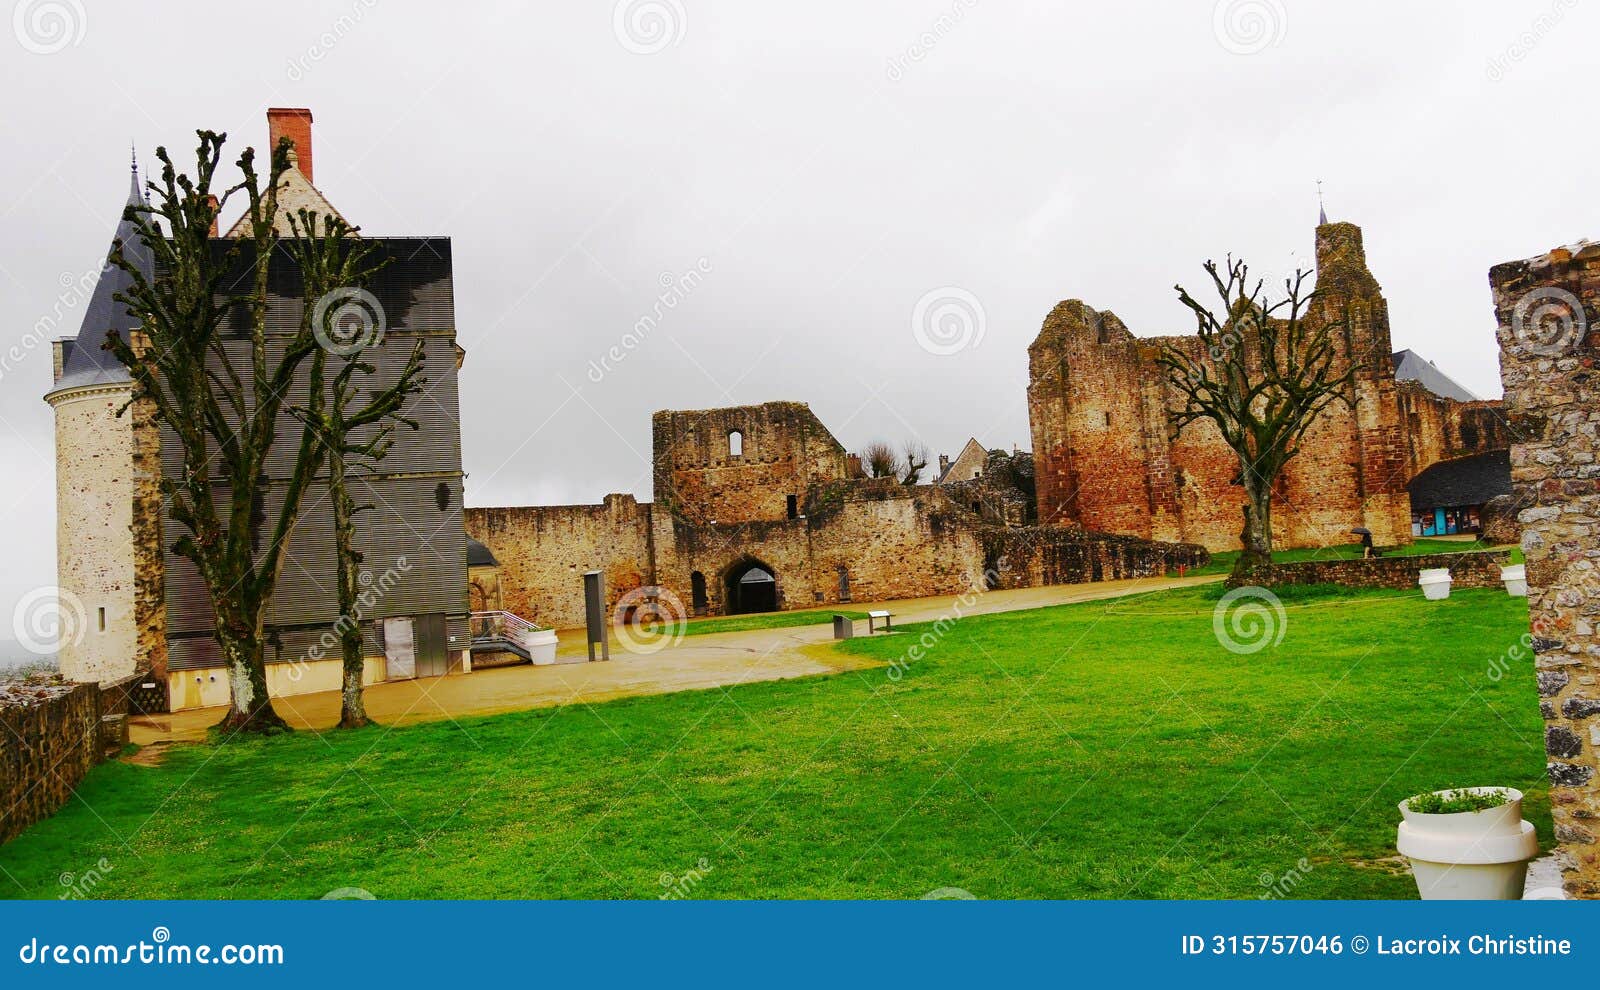 medieval castle of sainte-suzanne-et-chammes in the erve valley in mayenne france